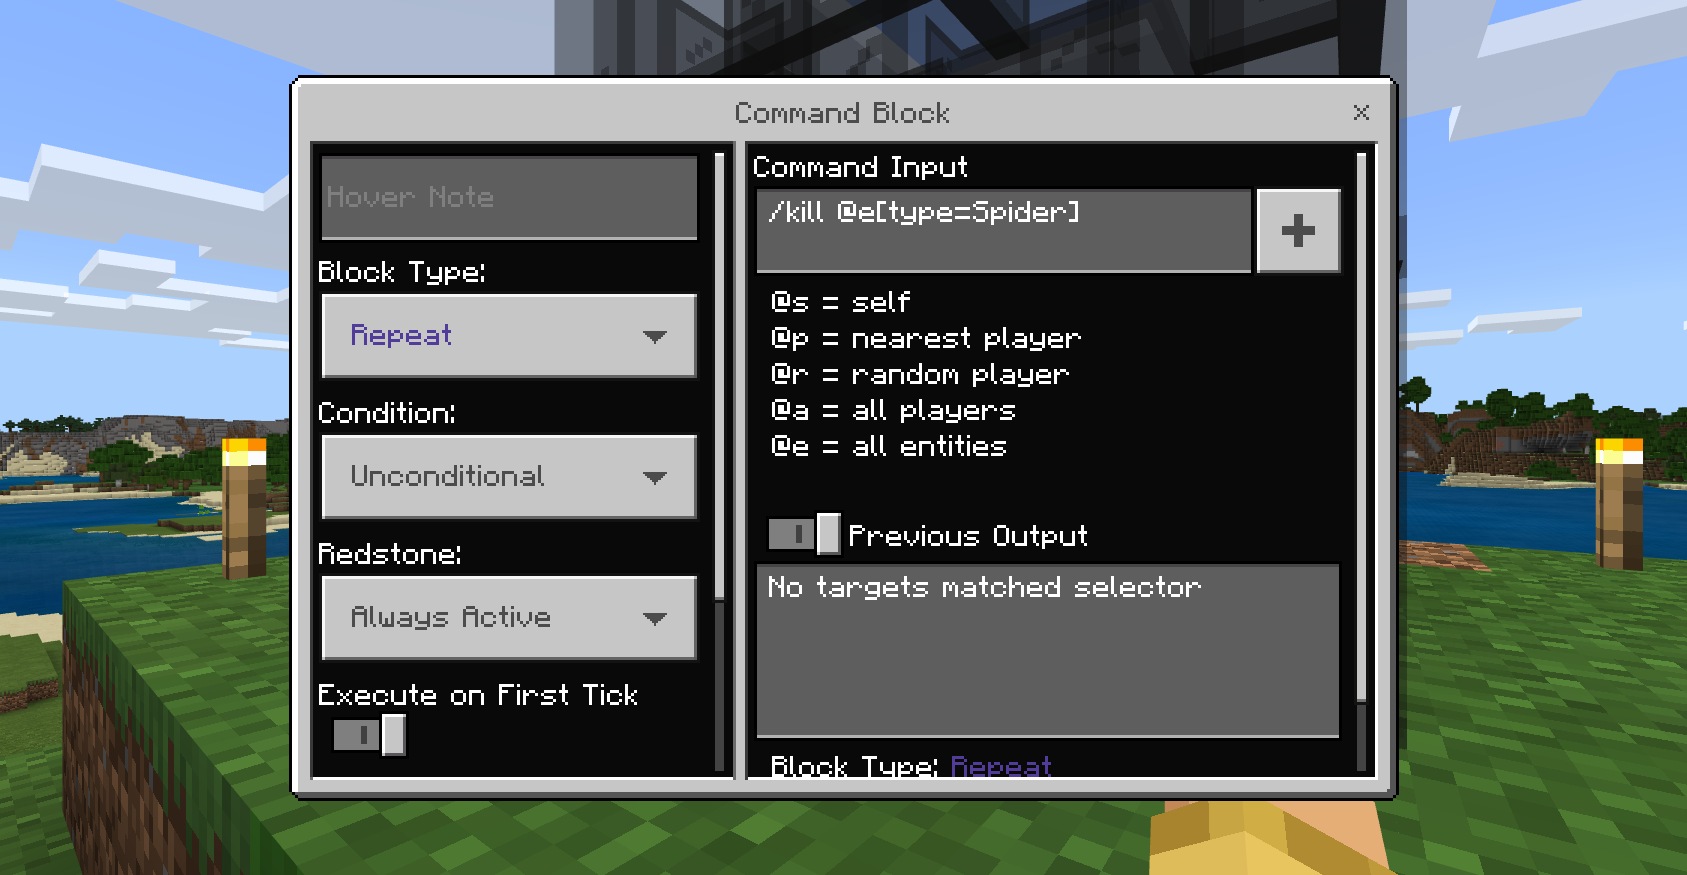 A Command Block prompt set to kill spiders